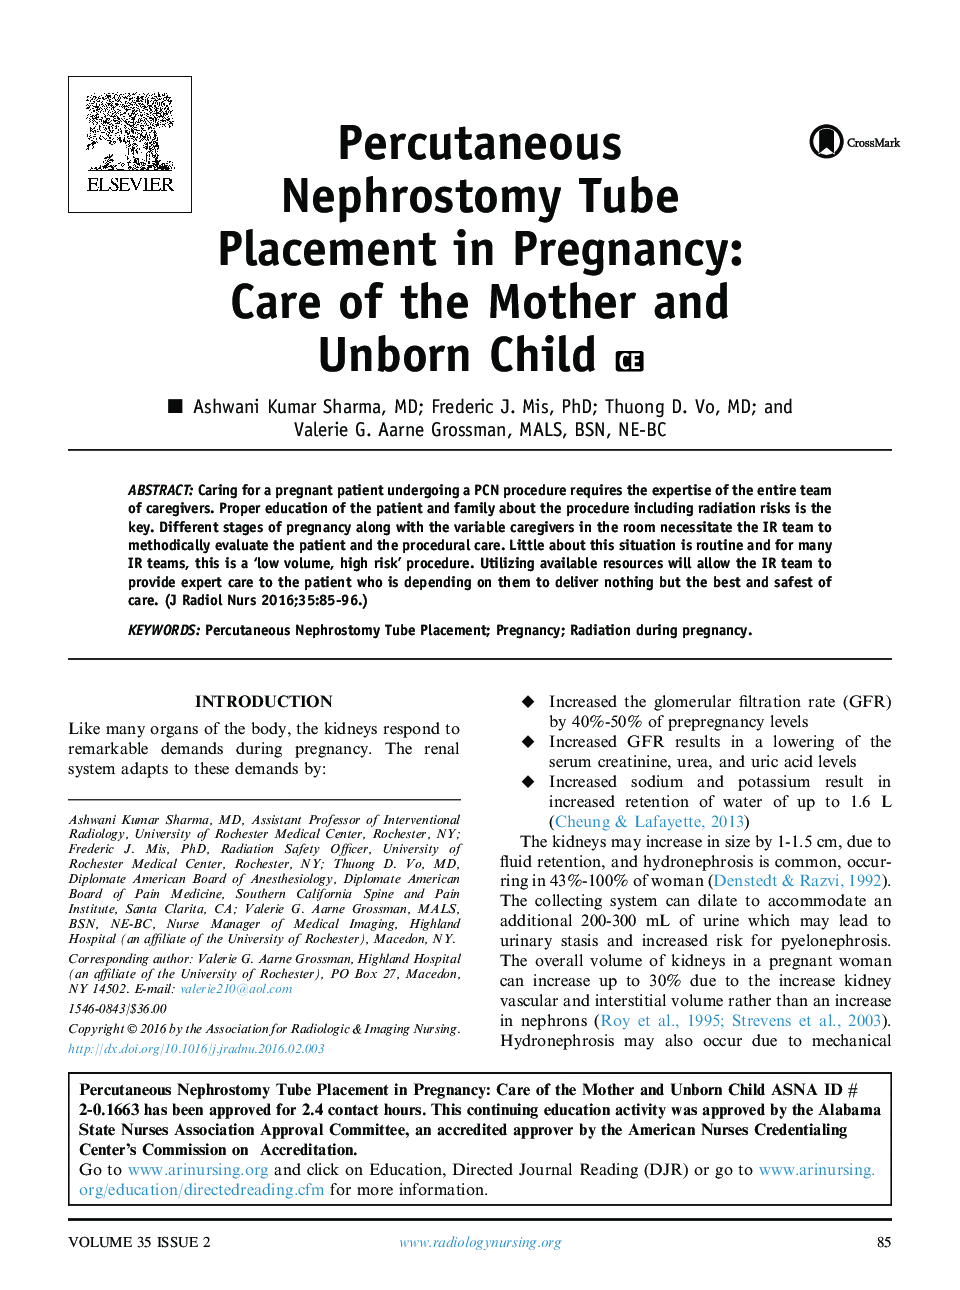 Percutaneous Nephrostomy Tube Placement in Pregnancy: Care of the Mother and Unborn Child